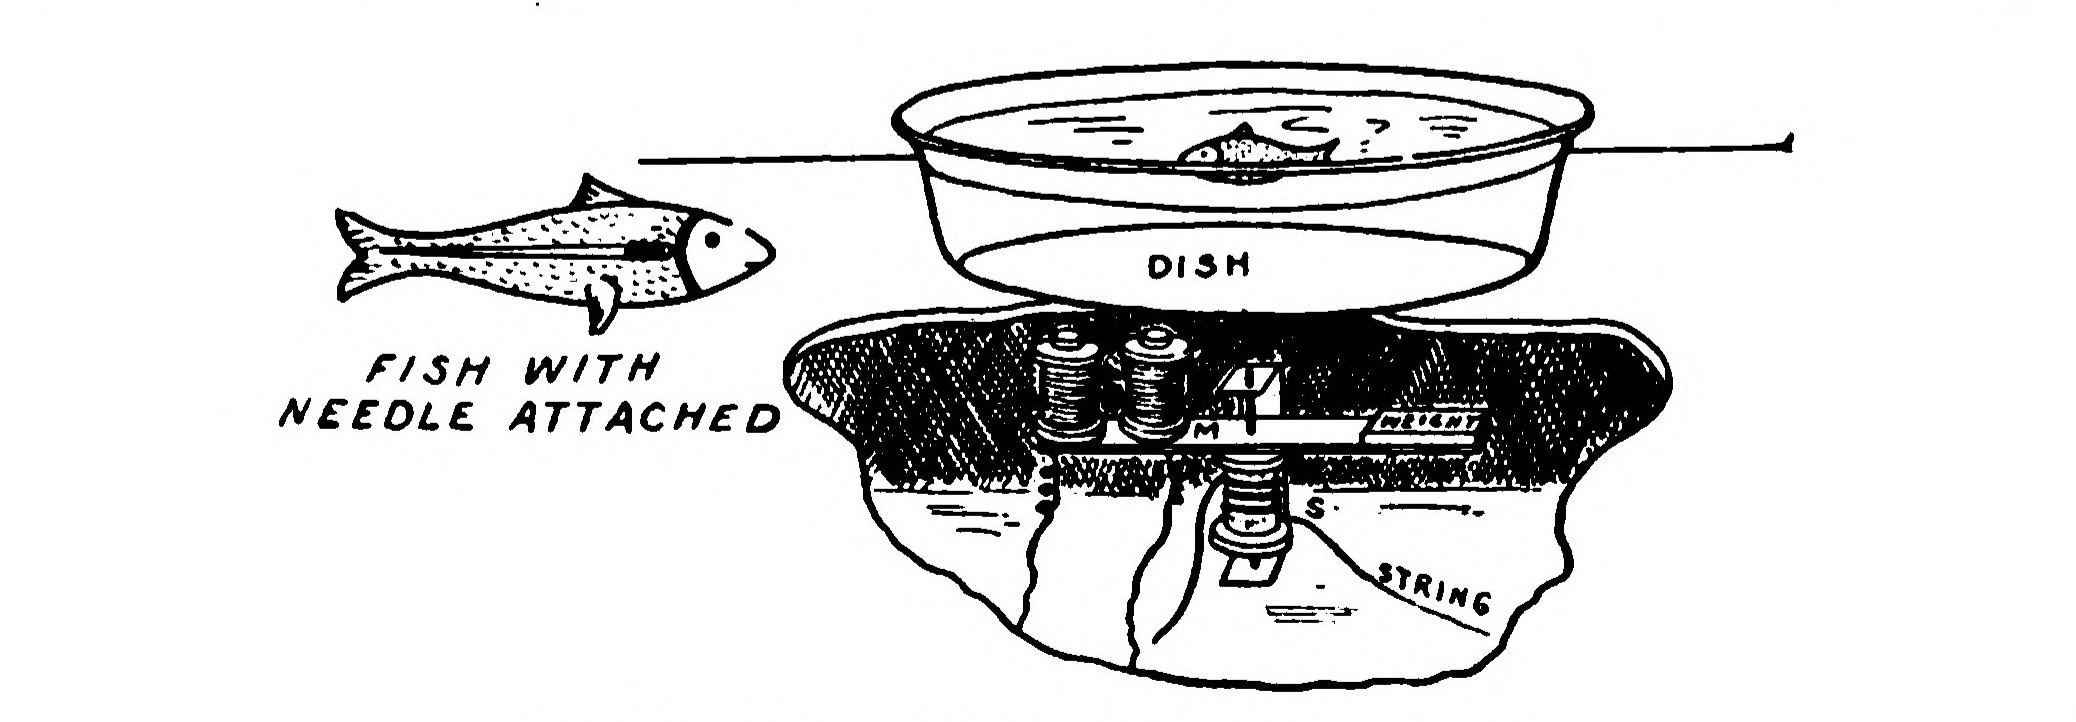 FIG. 191.—The Magnetic Fish.